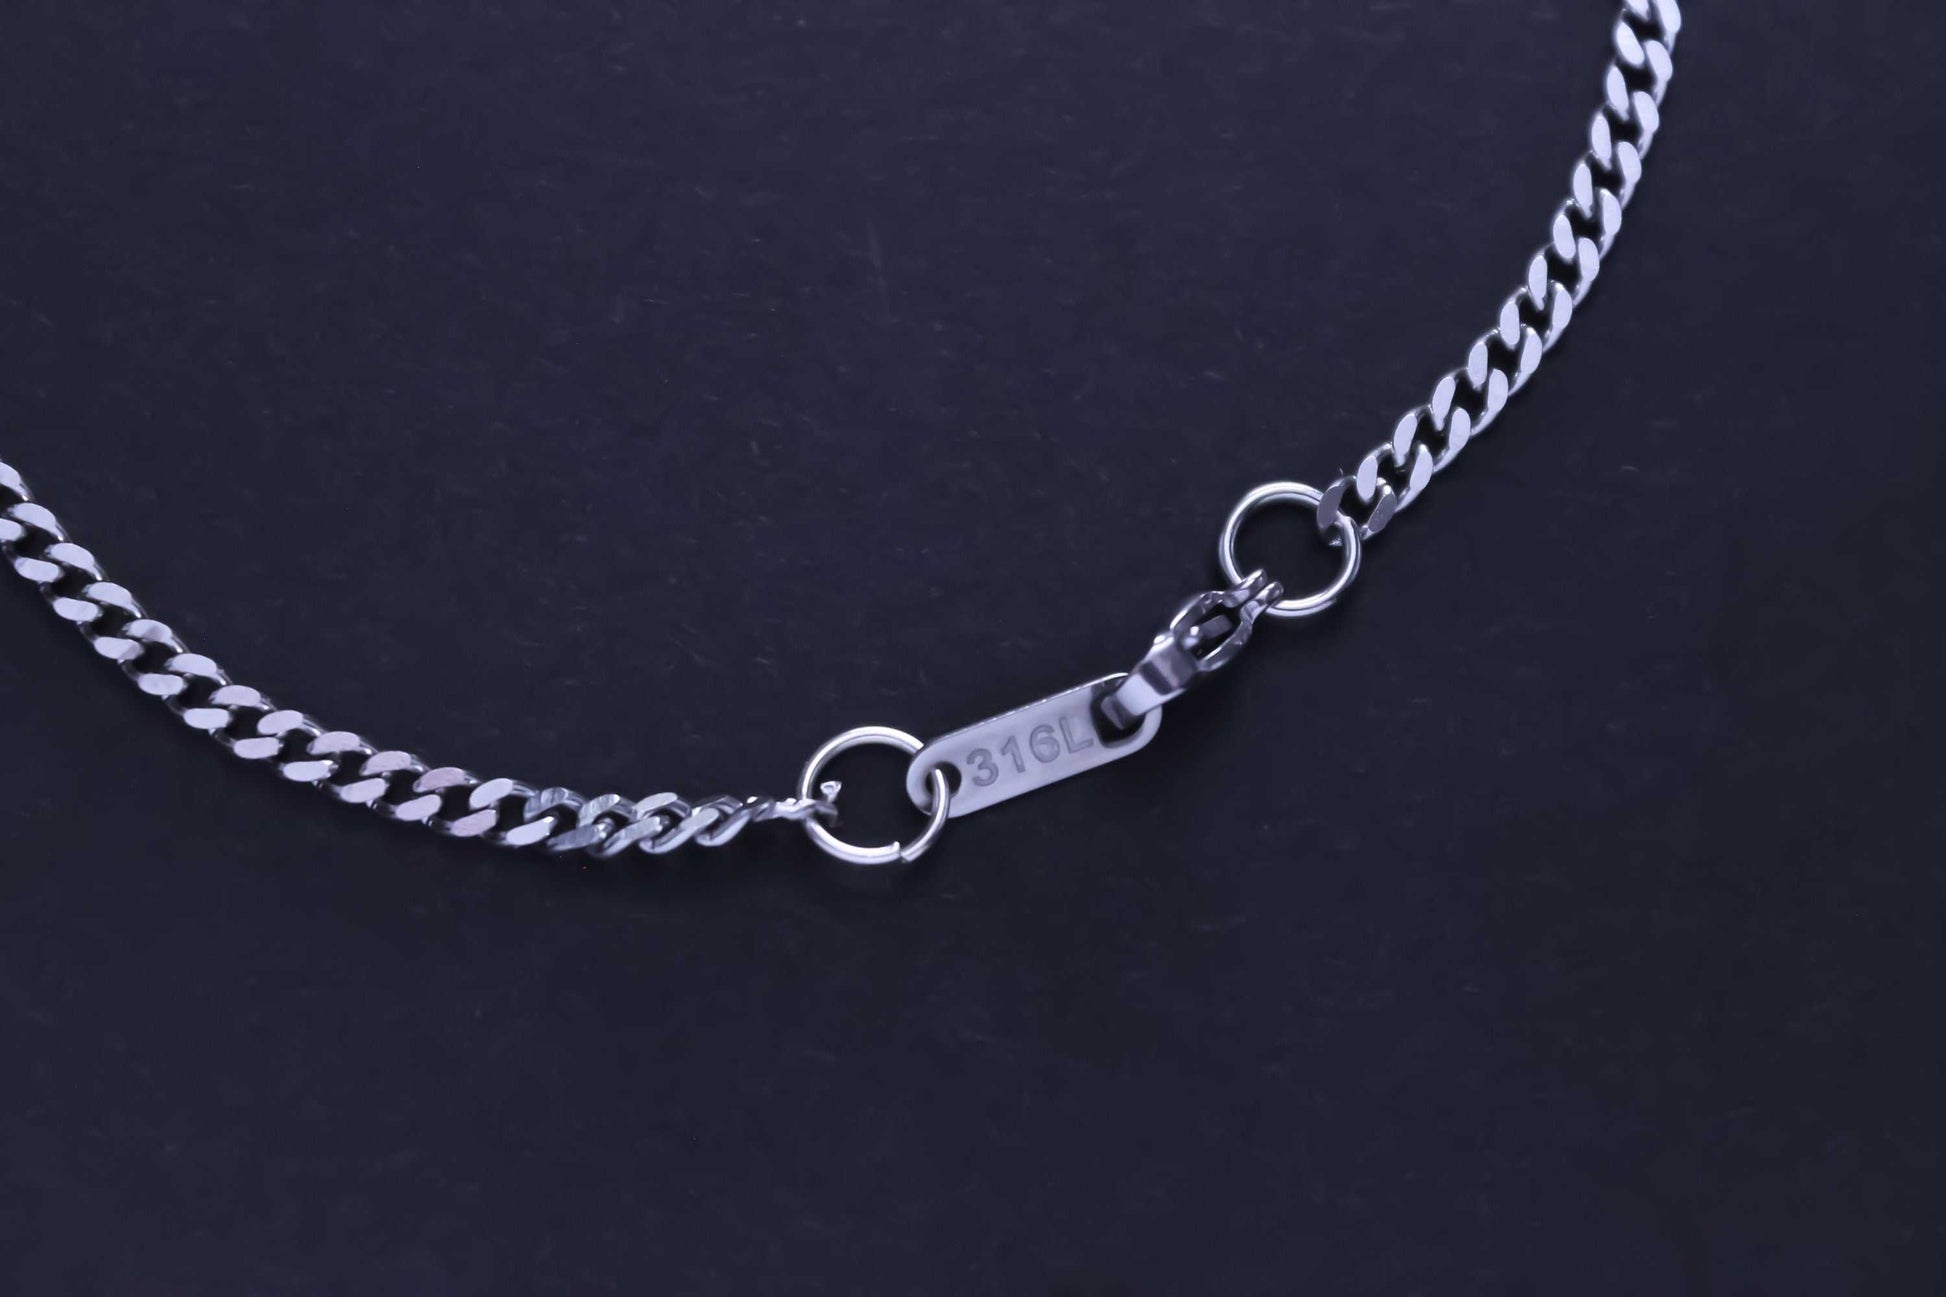 CRW Tiny Lizard Necklace with 2mm faceted miami cuban chain in silver - Necklaces for Women - Necklace for Men - Necklace with Pendant